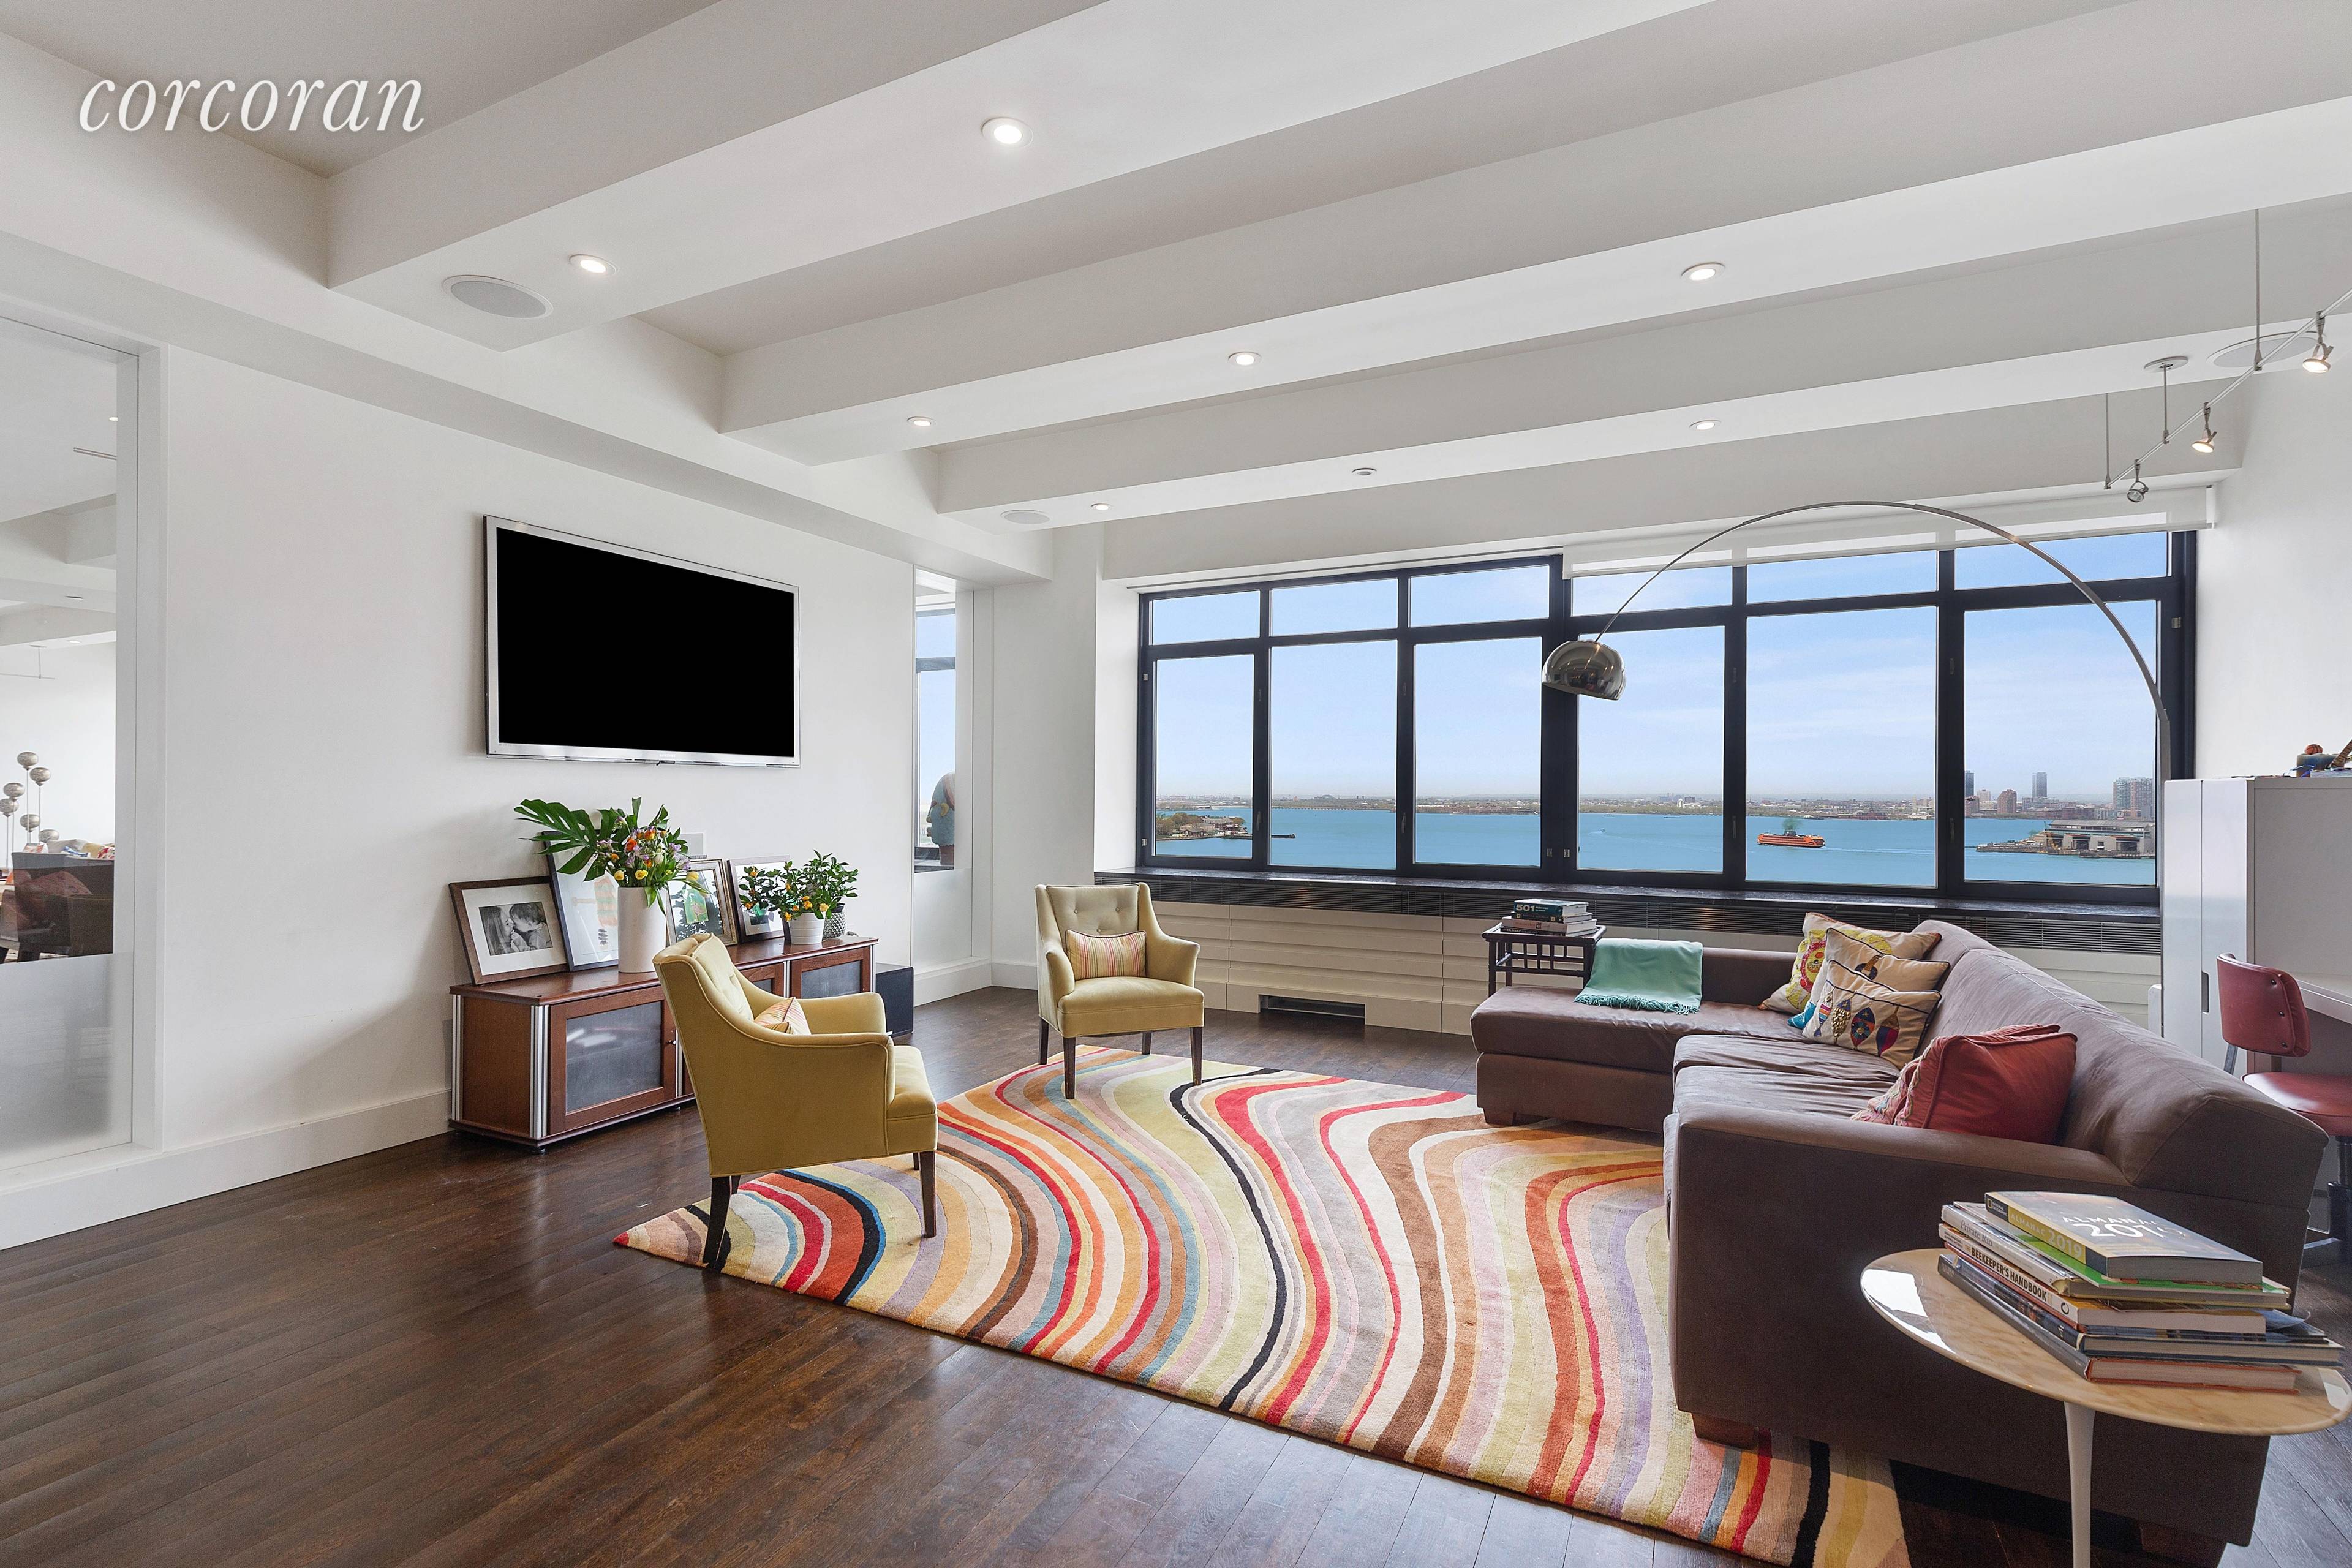 One Year in PARADISE PLUS PARKING INCLUDED describes this incredibly beautiful, 5, 000 Square foot luxury home overlooking the East River, Manhattan skyline, the Statue of Liberty, the Brooklyn skyline ...